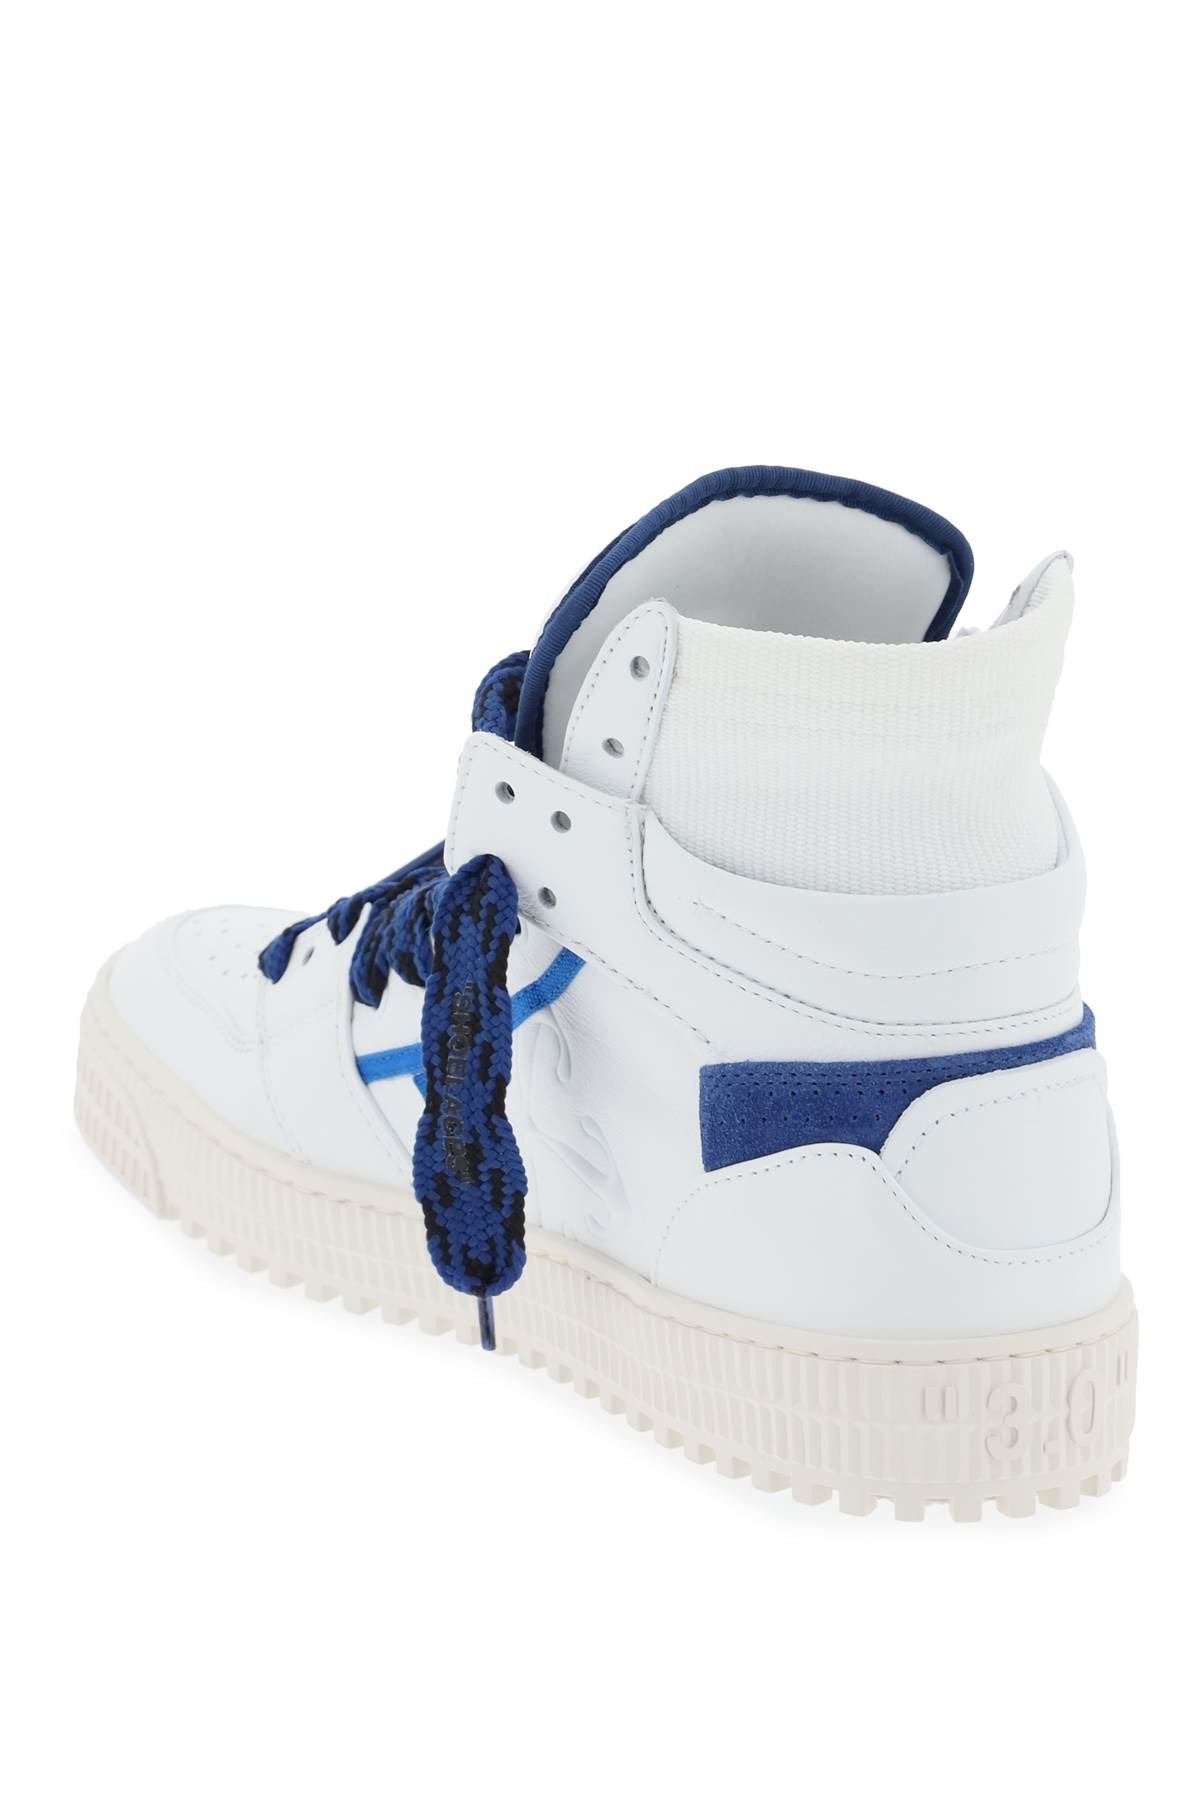 OFF-WHITE White and Blue Leather High-Top Sneaker for Men